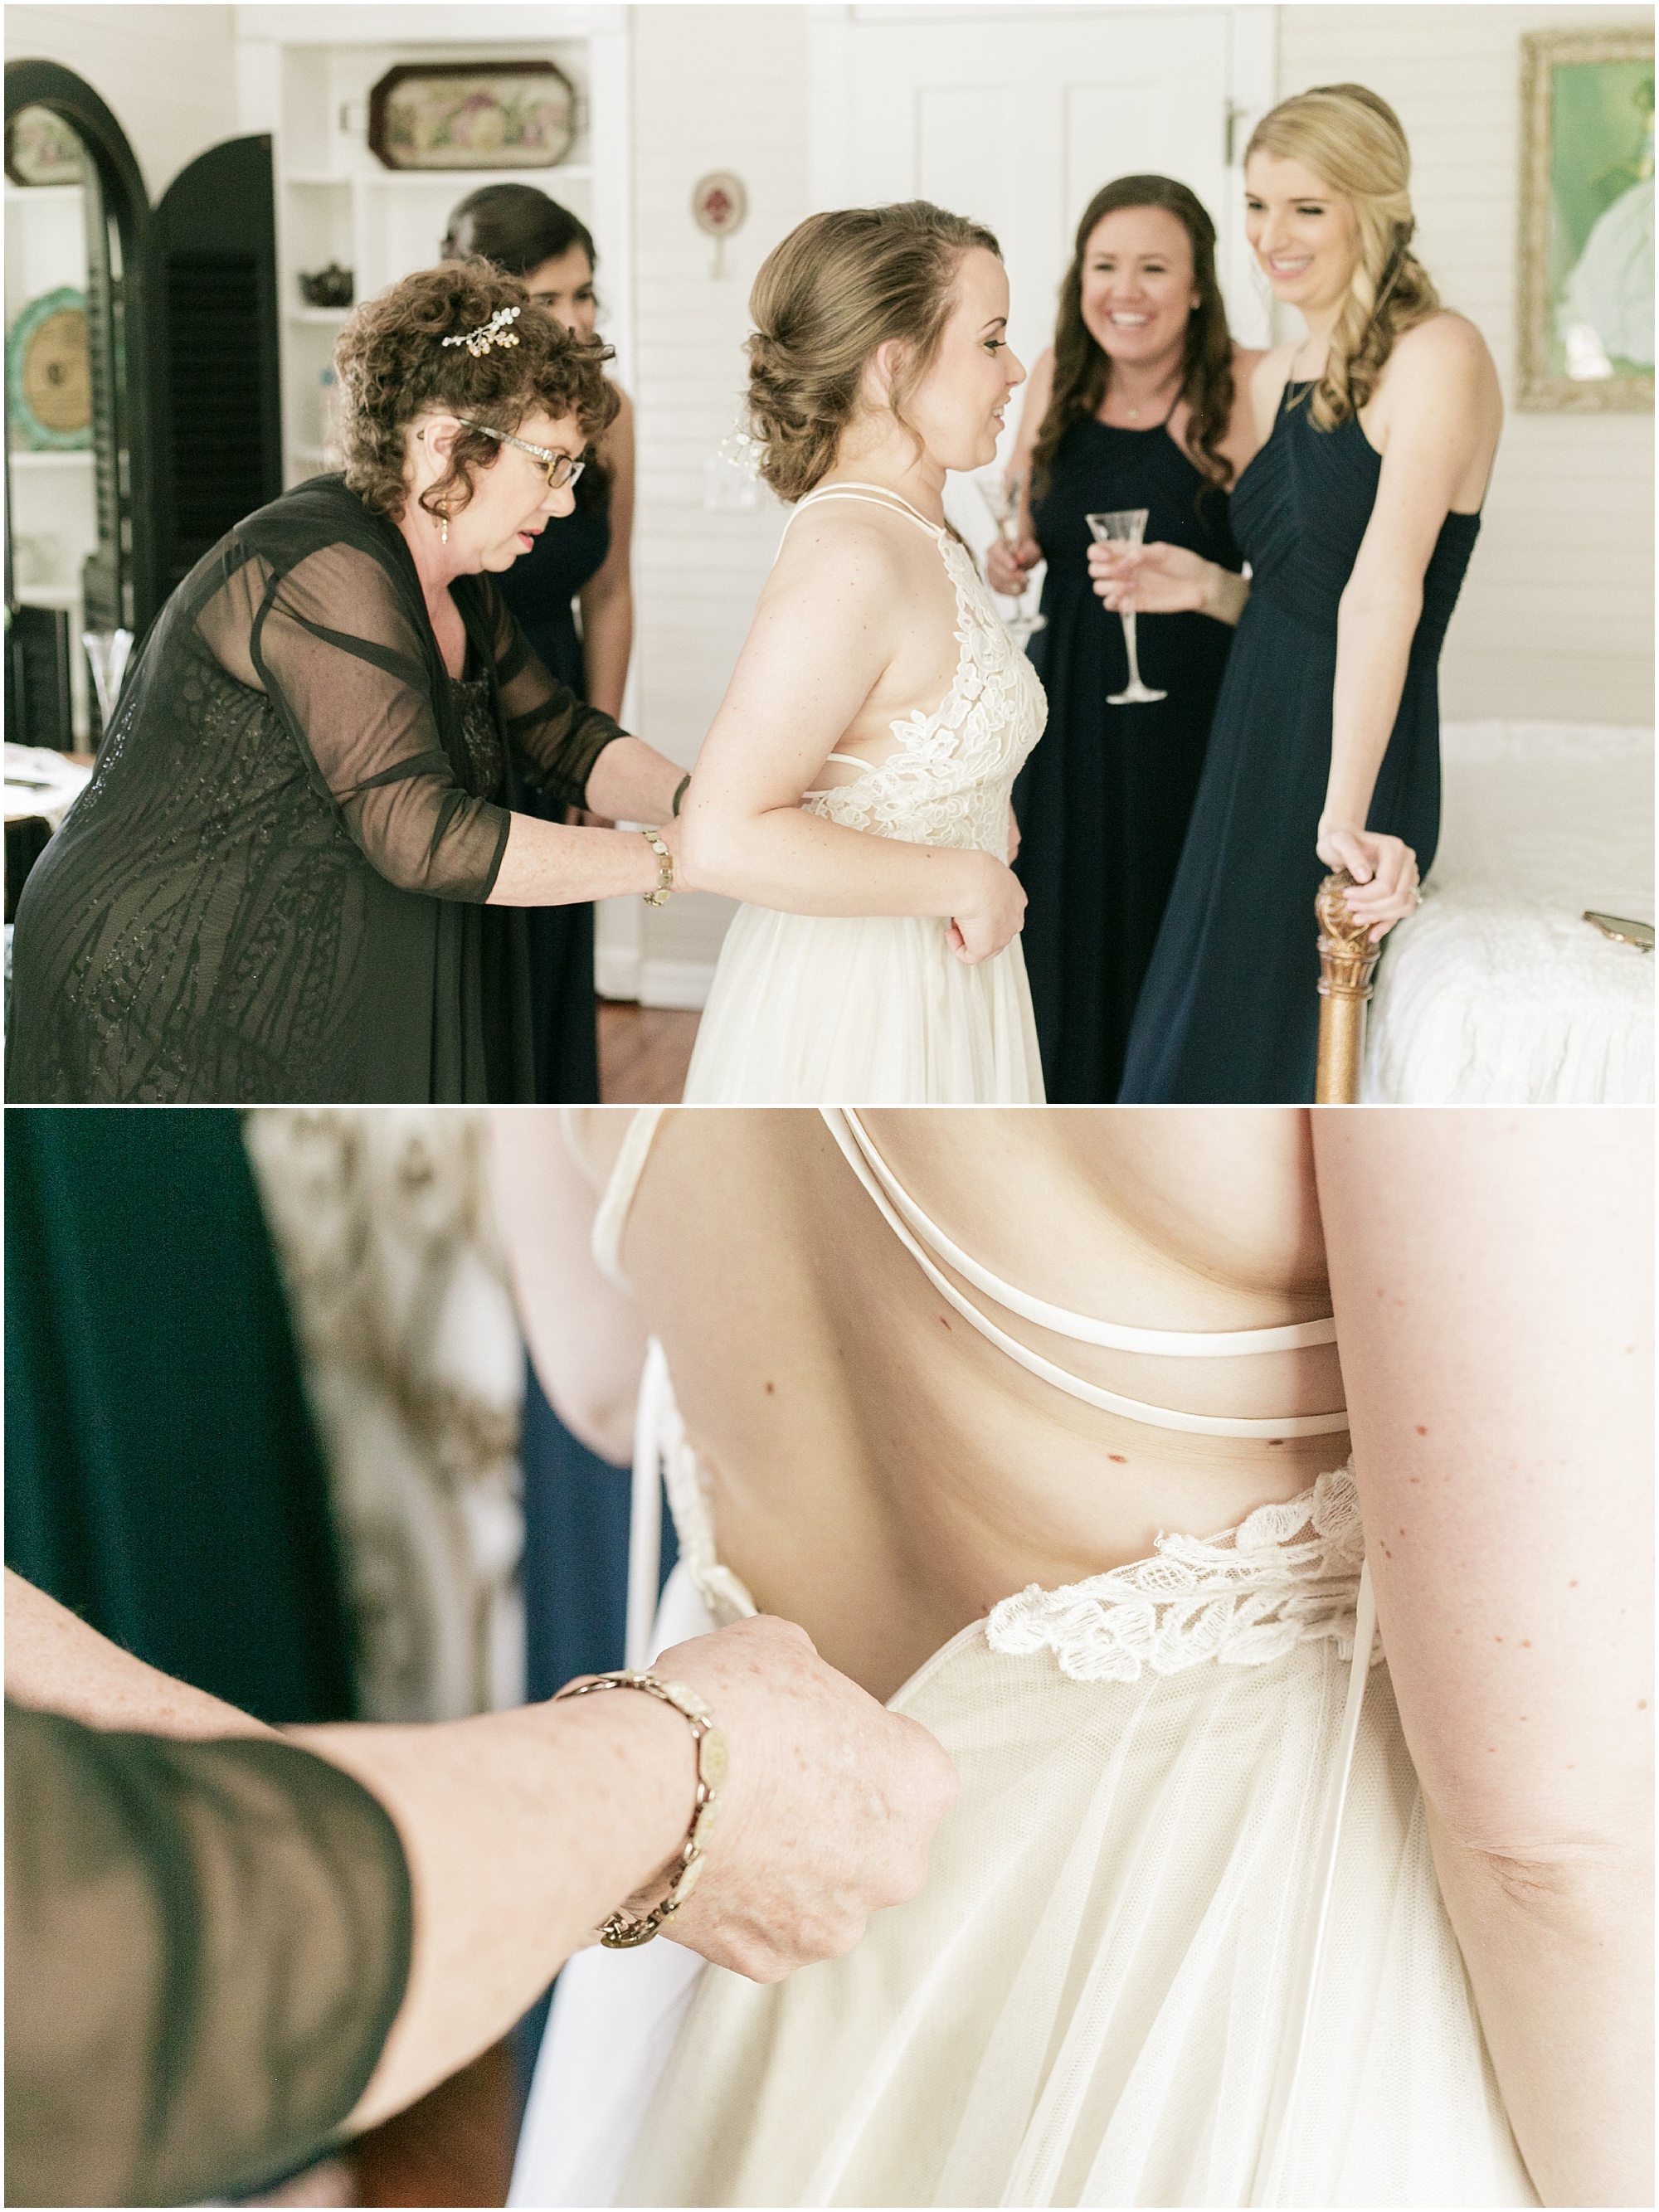 Bridal party helping the bride zip up her dress